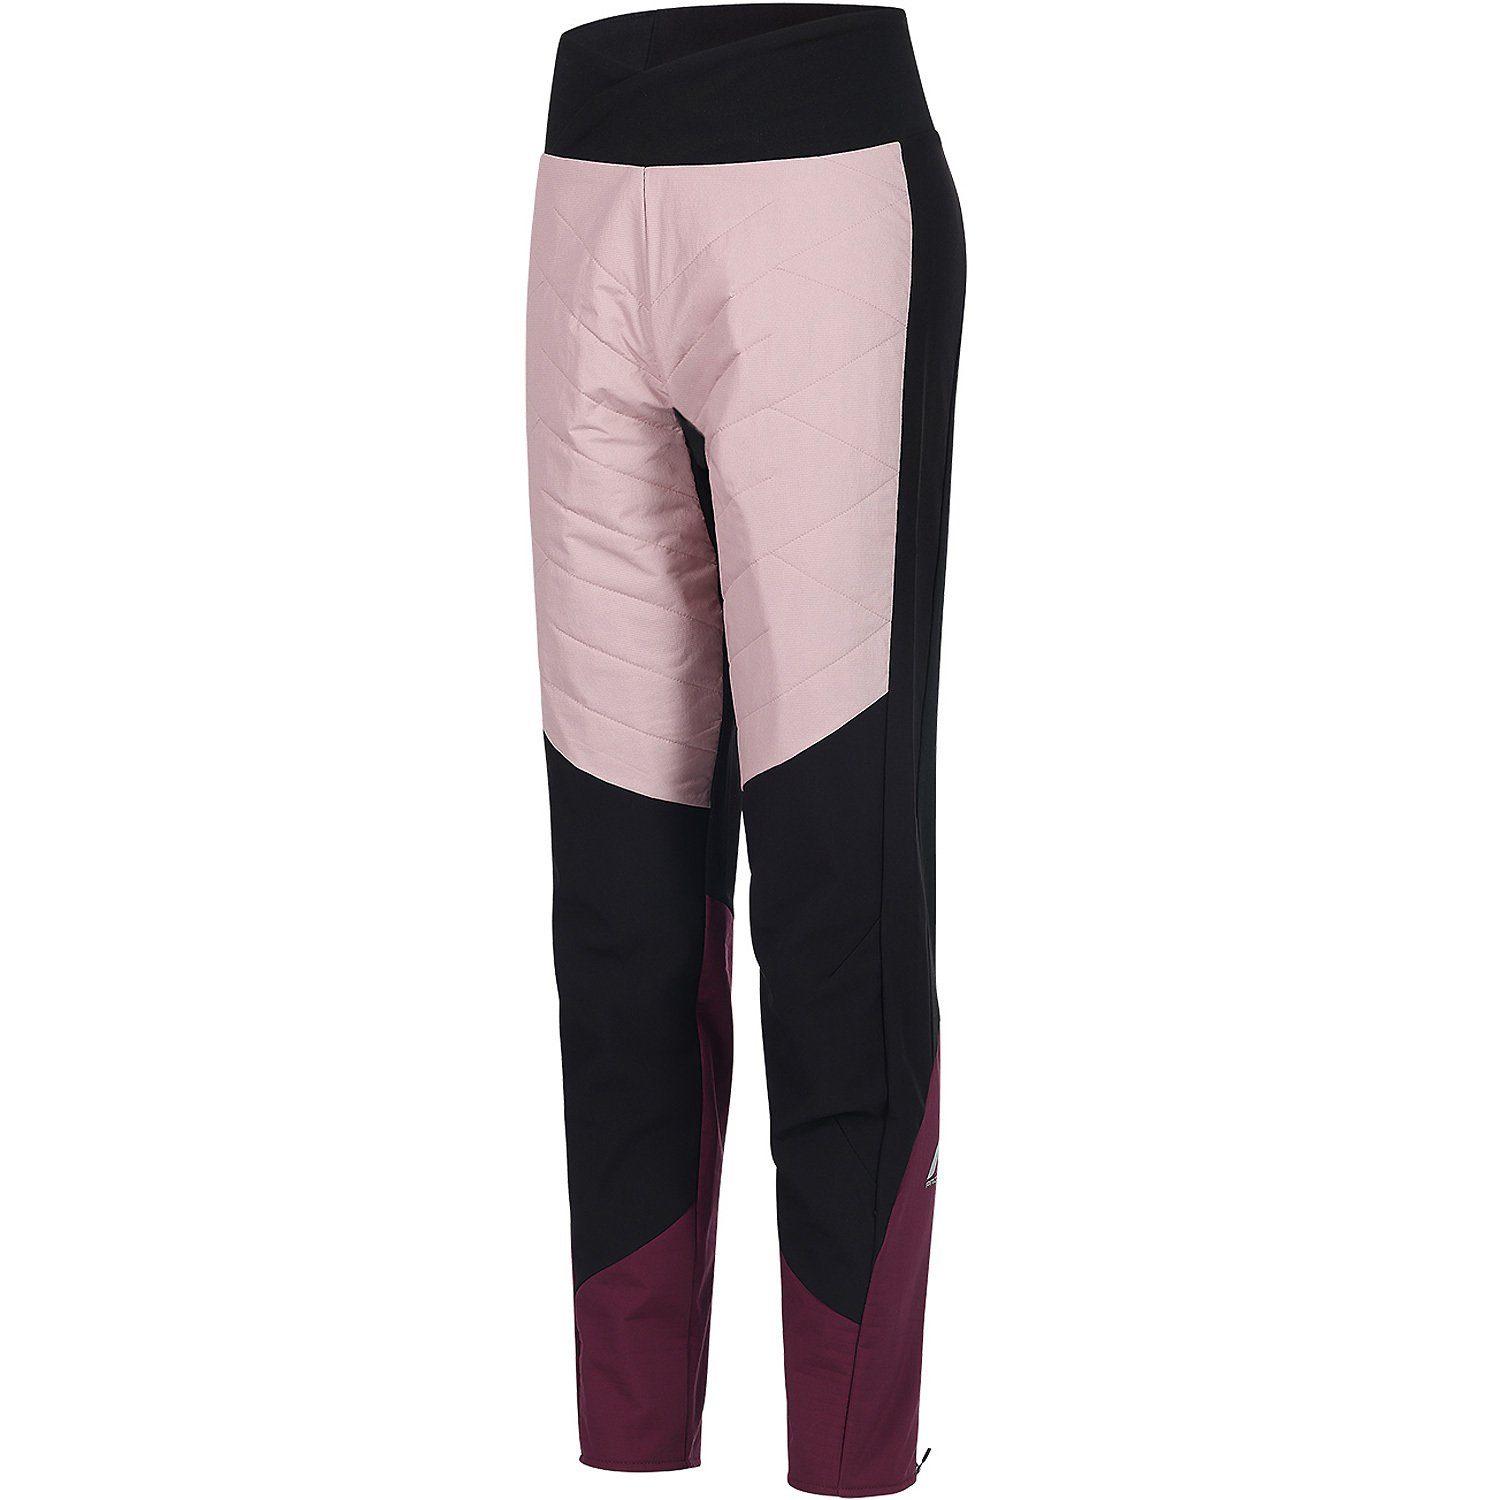 Protective Funktionshose Outdoorhose P-Cold Gin, Isolierende Tight im  winddichten, atmungsaktiven